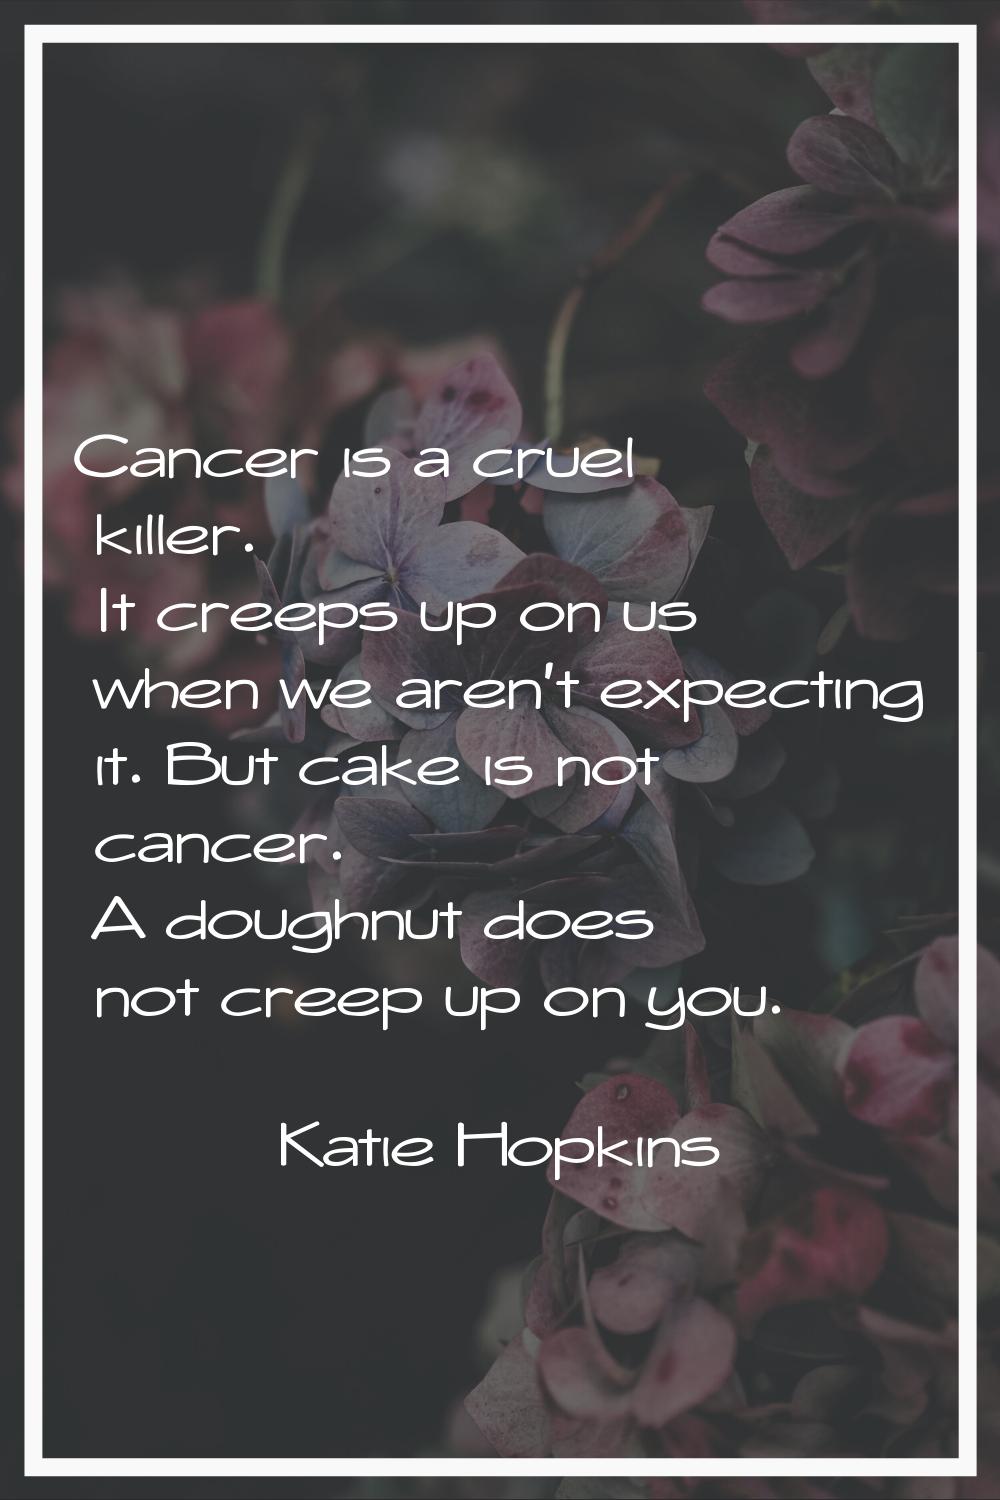 Cancer is a cruel killer. It creeps up on us when we aren't expecting it. But cake is not cancer. A